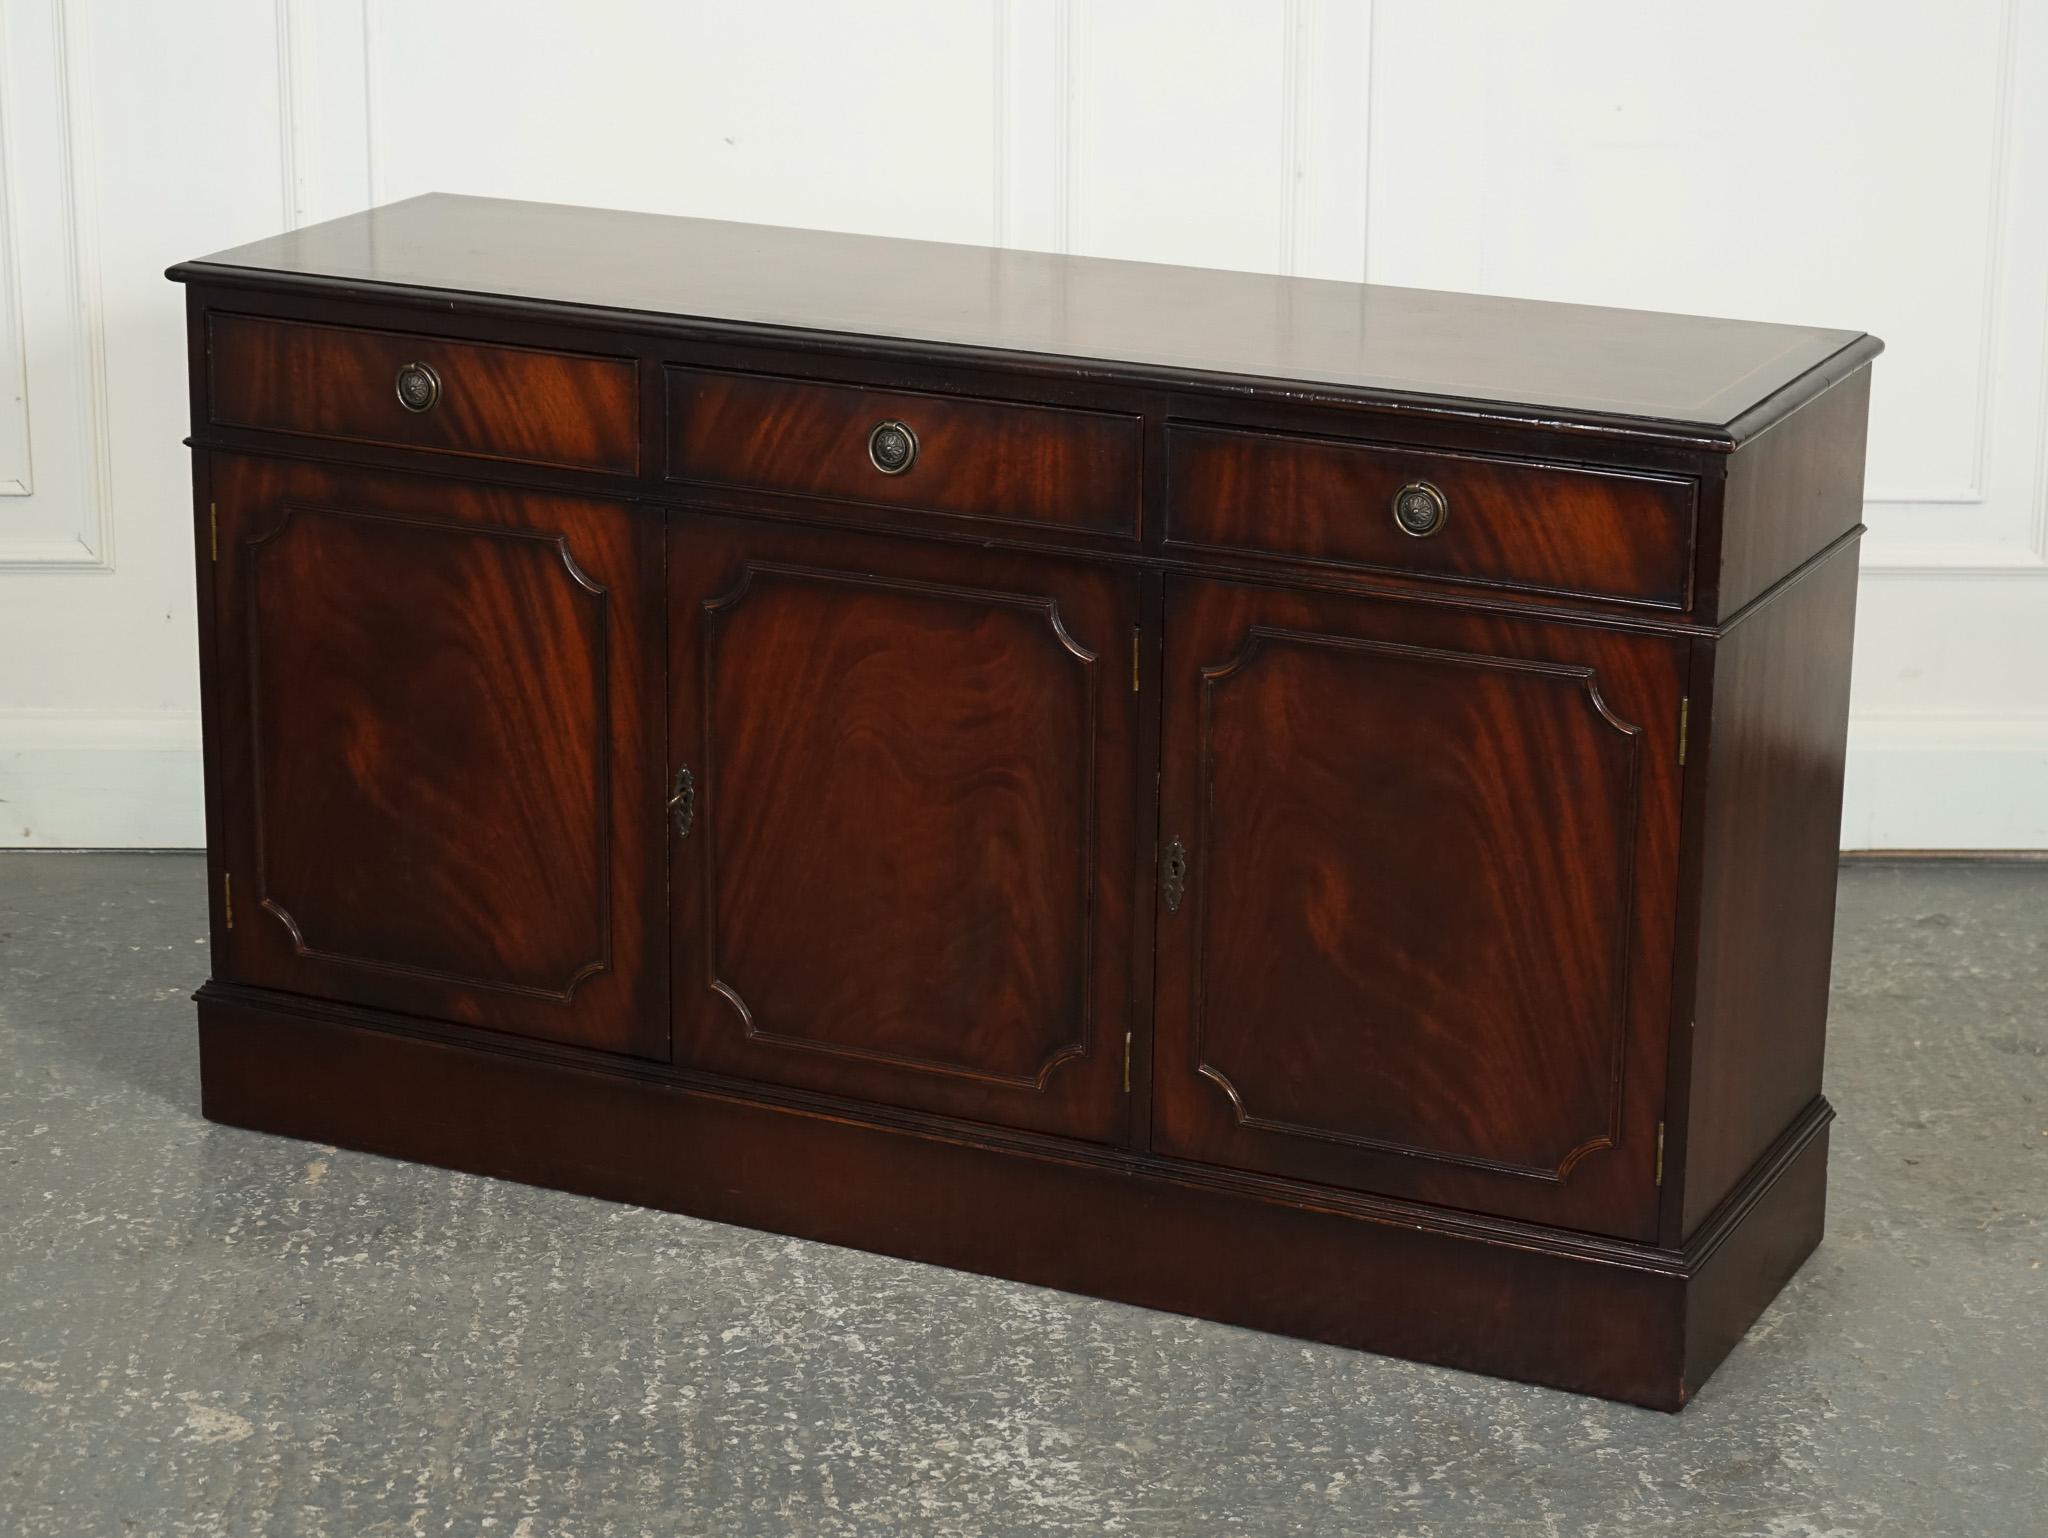 
We are delighted to offer for sale this Lovely Flamed Hardwood Sideboard.

A lovely flamed hardwood Georgian-style buffet sideboard is a magnificent and elegant furniture piece that exudes traditional charm and sophistication. The term 